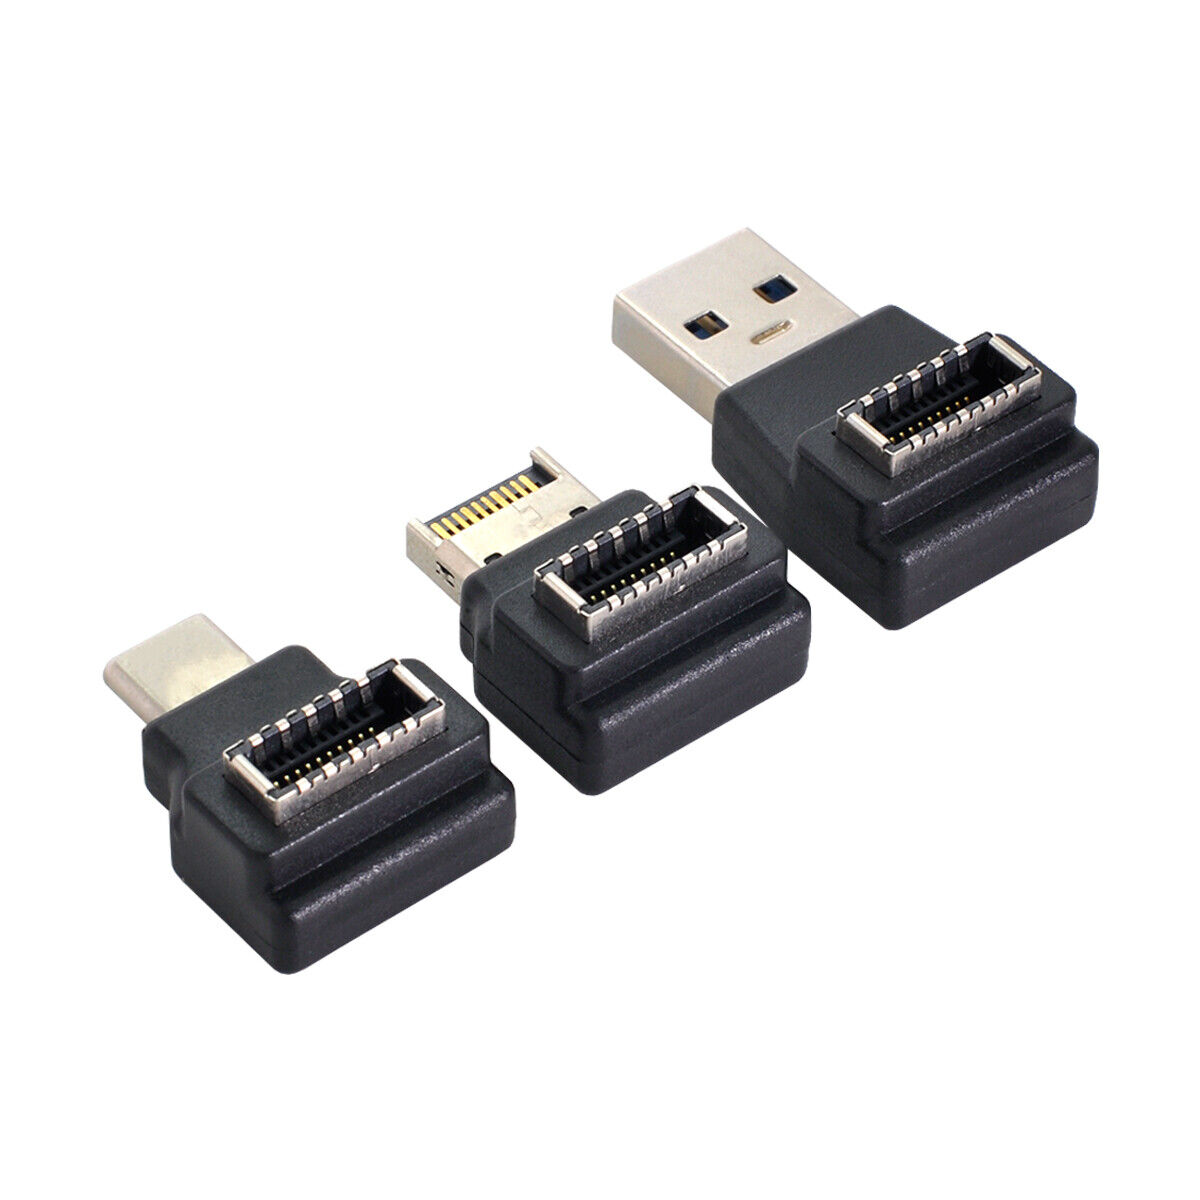 Cablecc  3pcs Adapter USB 3.1 Front Panel Type-A & Type-C Header Female Type-E